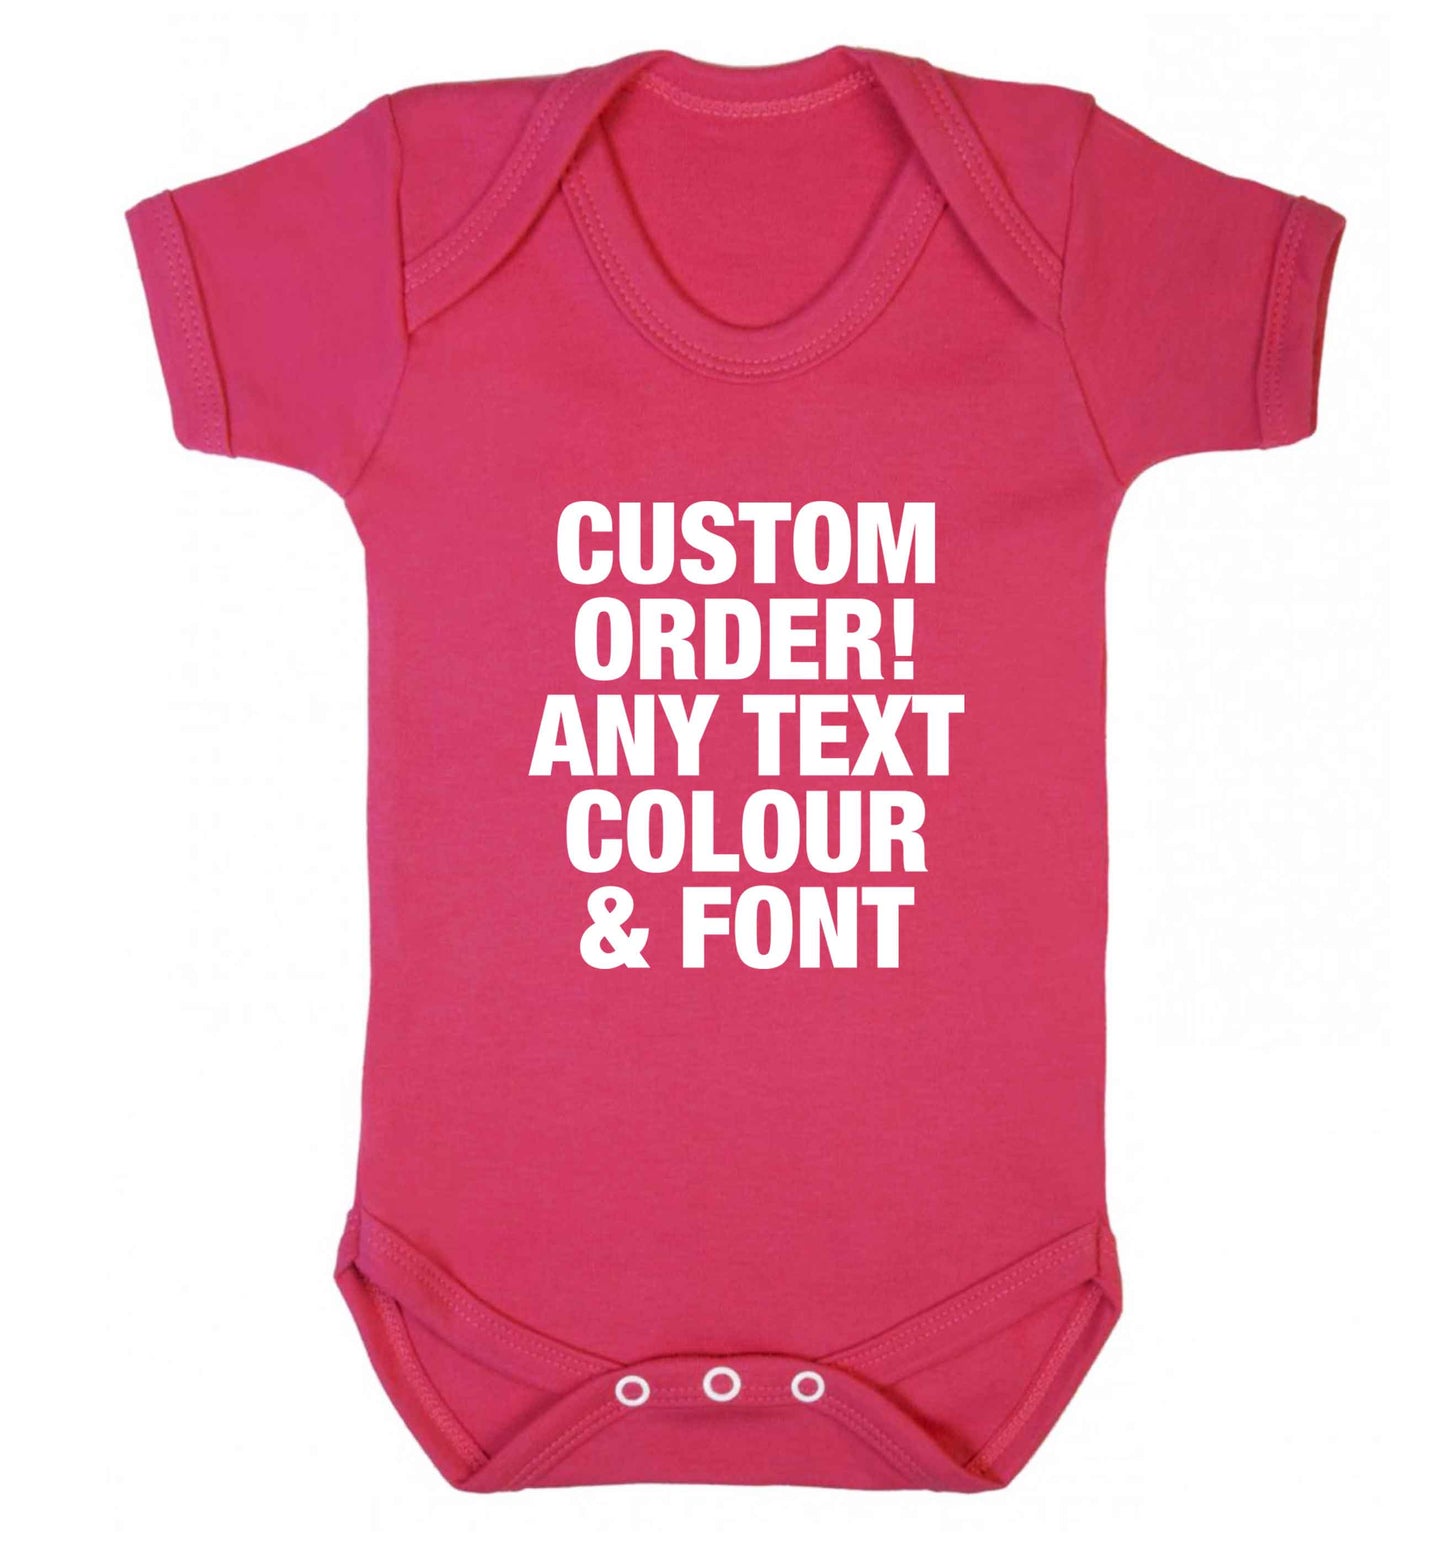 Custom order any text colour and font baby vest dark pink 18-24 months